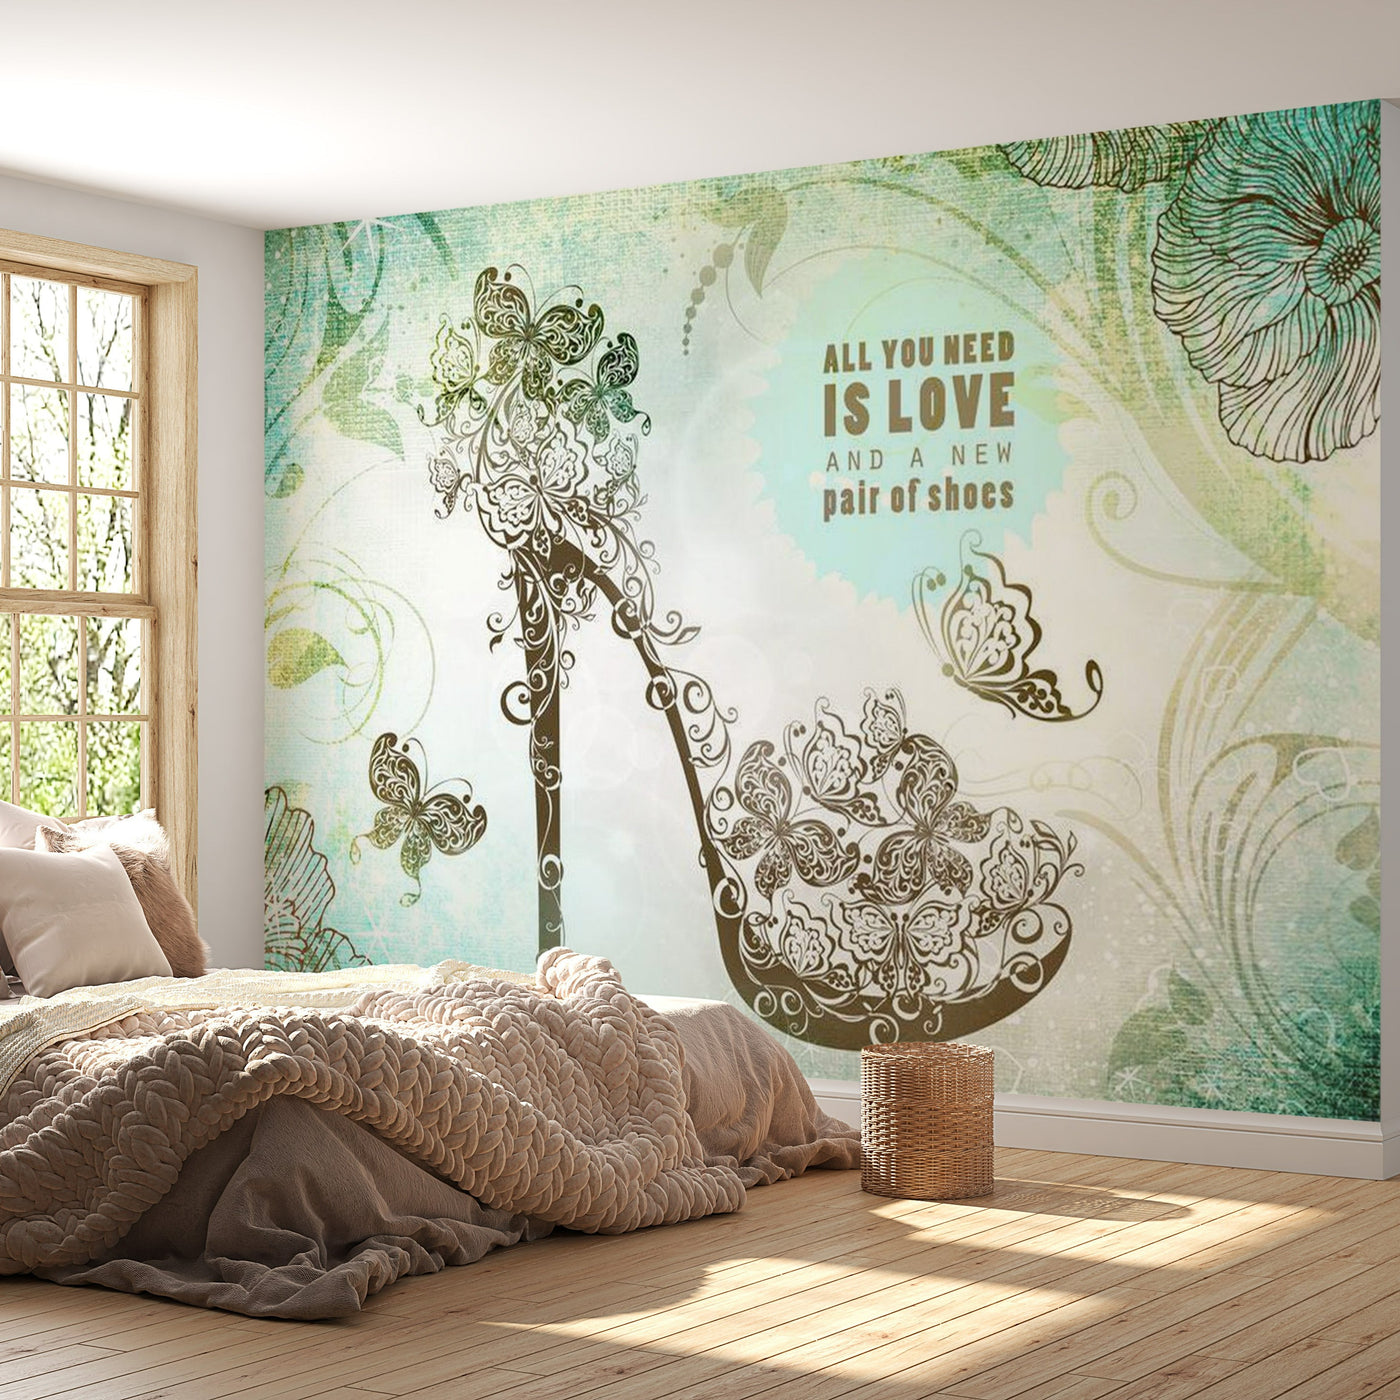 Floral Wallpaper Wall Mural - All You Need Is A New Pair Of Shoes